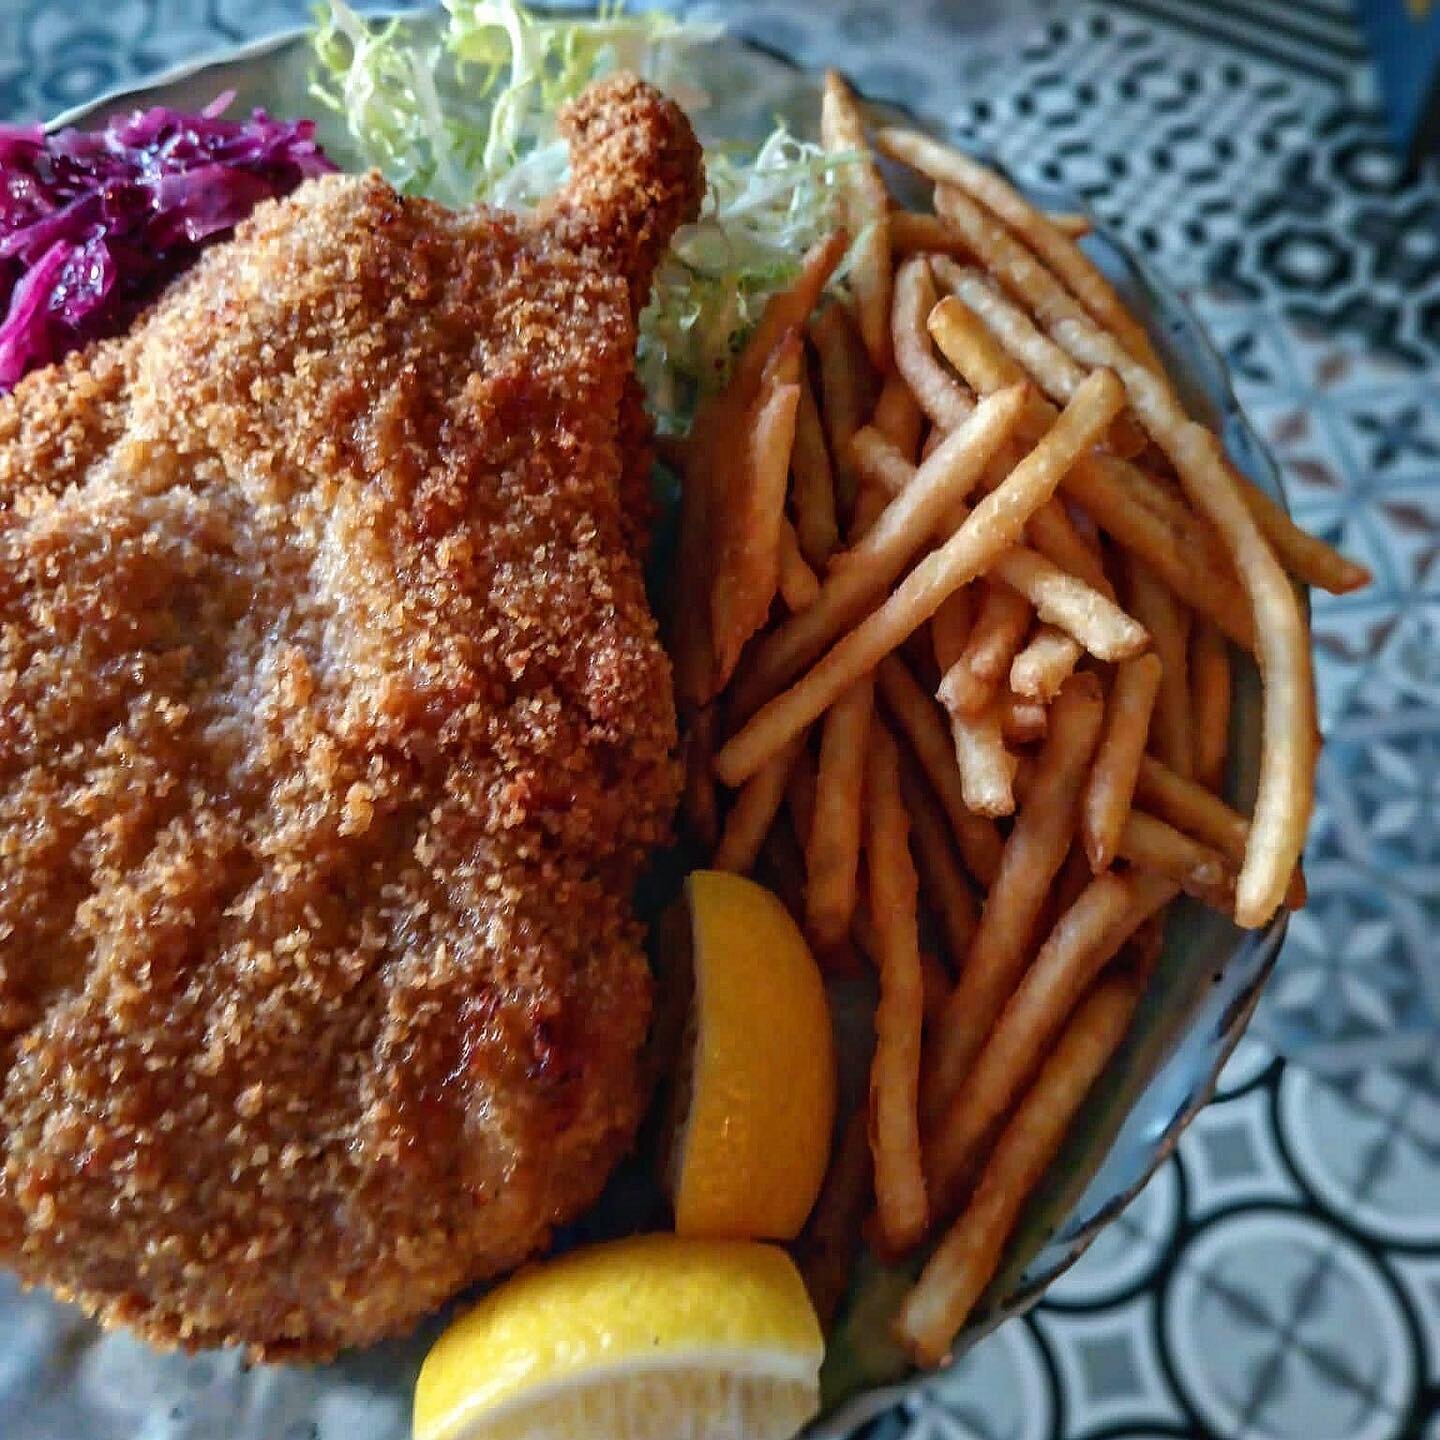 🍻It&rsquo;s #oktoberfest Szn 🍻 
Check out our delicious Pork Chop #schnitzel with classic French fries, red cabbage and little wedge of lemon 🍋 
#archiegrand #dontbeaveragebegrand